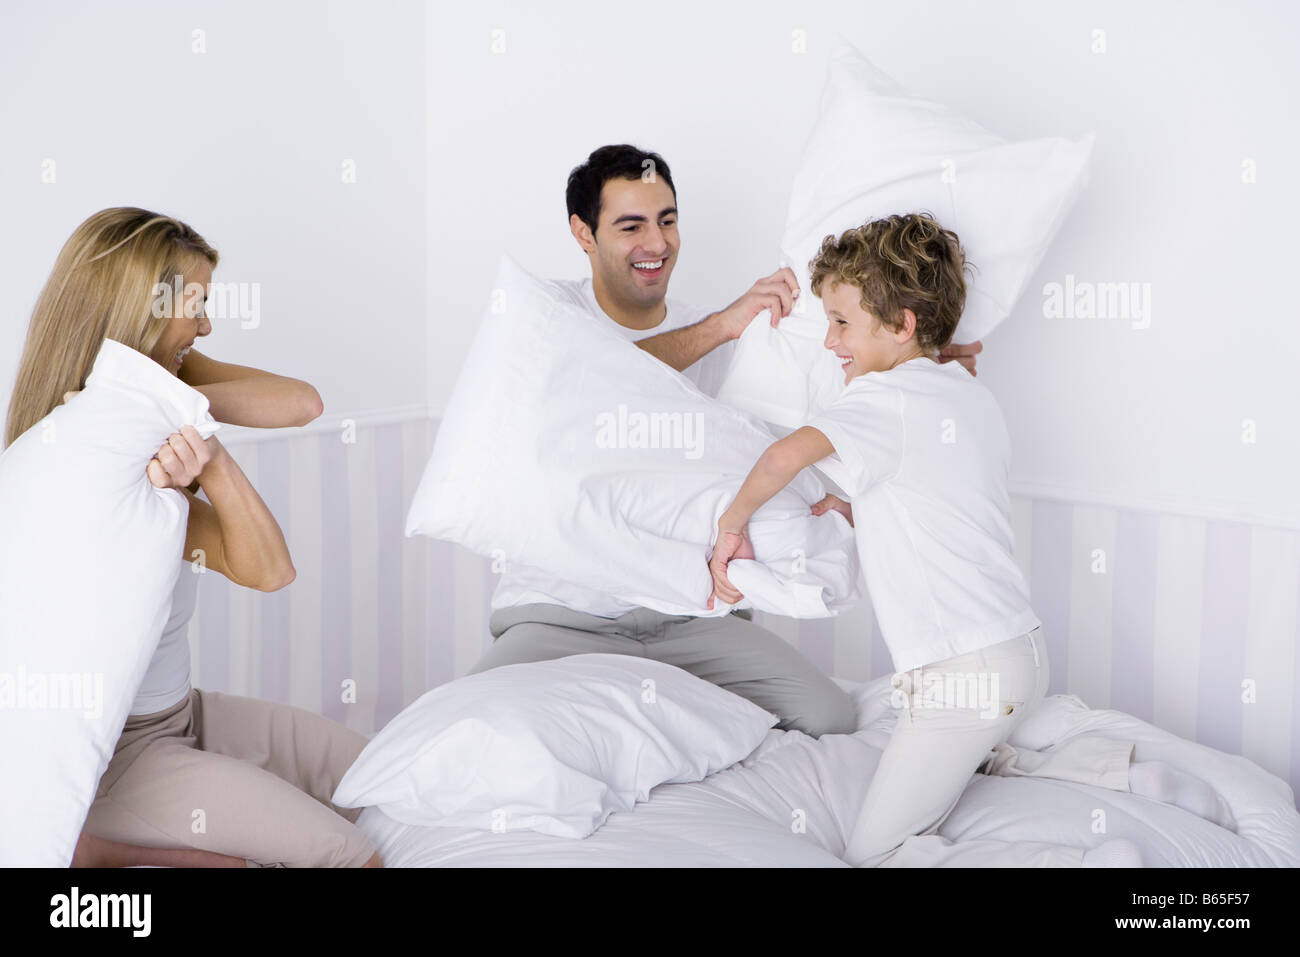 Family having pillow fight on bed Banque D'Images